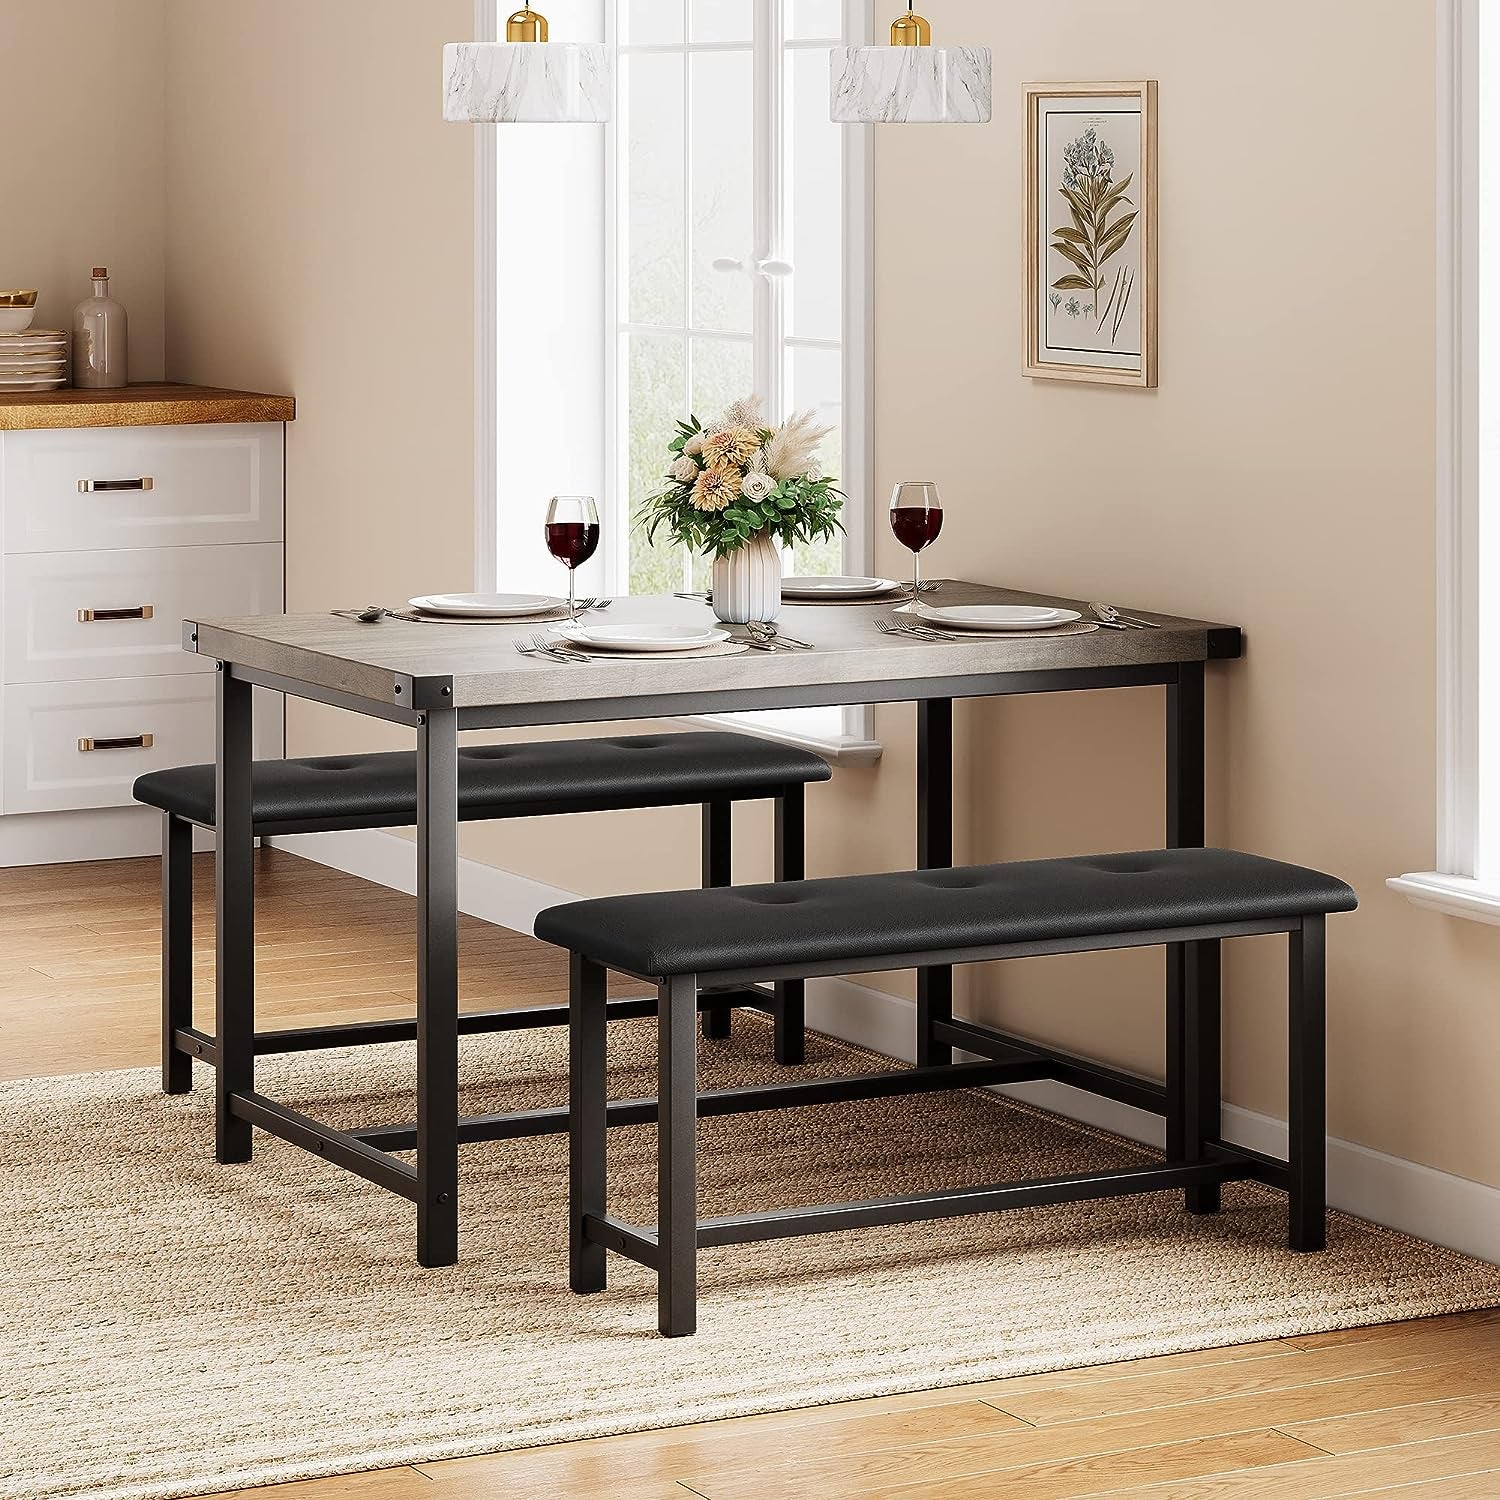 Dining Table Set for 4, Kitchen Table Set for 4 with Upholstered Benches, Rectangular Dining Room Table Set for Small Space, Apartment, Studio, Rustic Gray